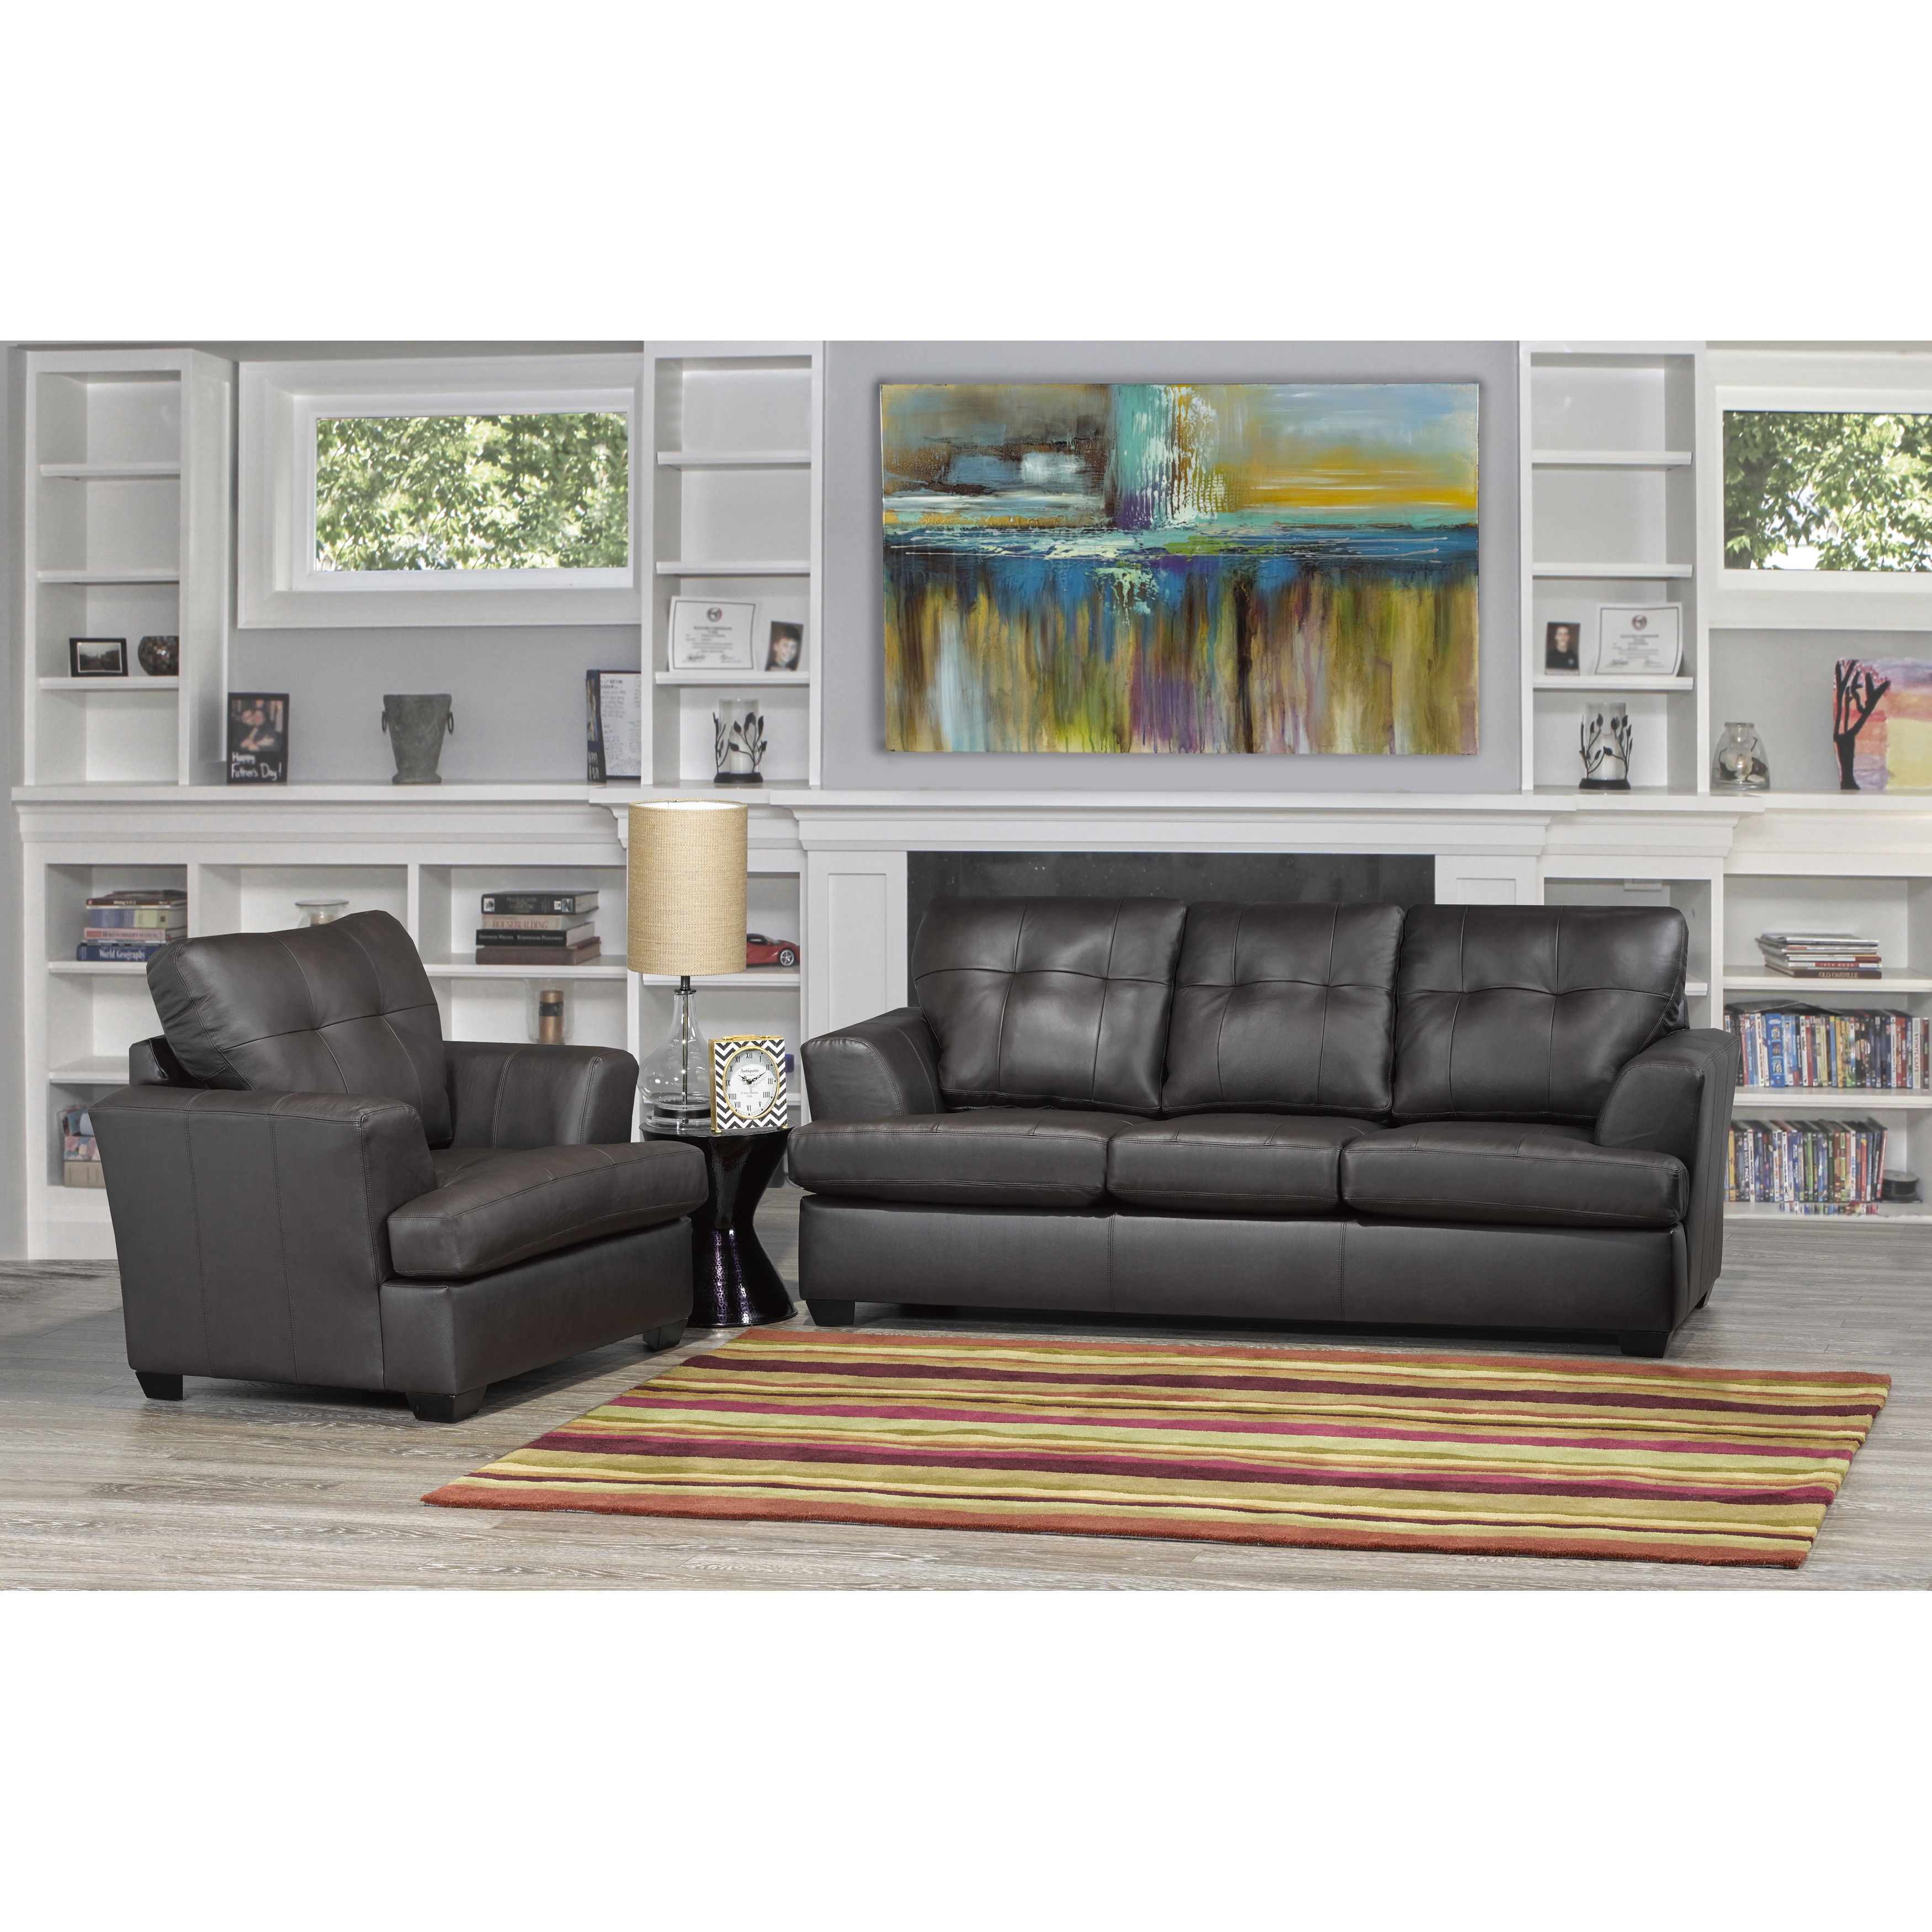 Carrera Premium Brown Top Grain Leather Sofa and Chair - On Sale -  Overstock - 13251176